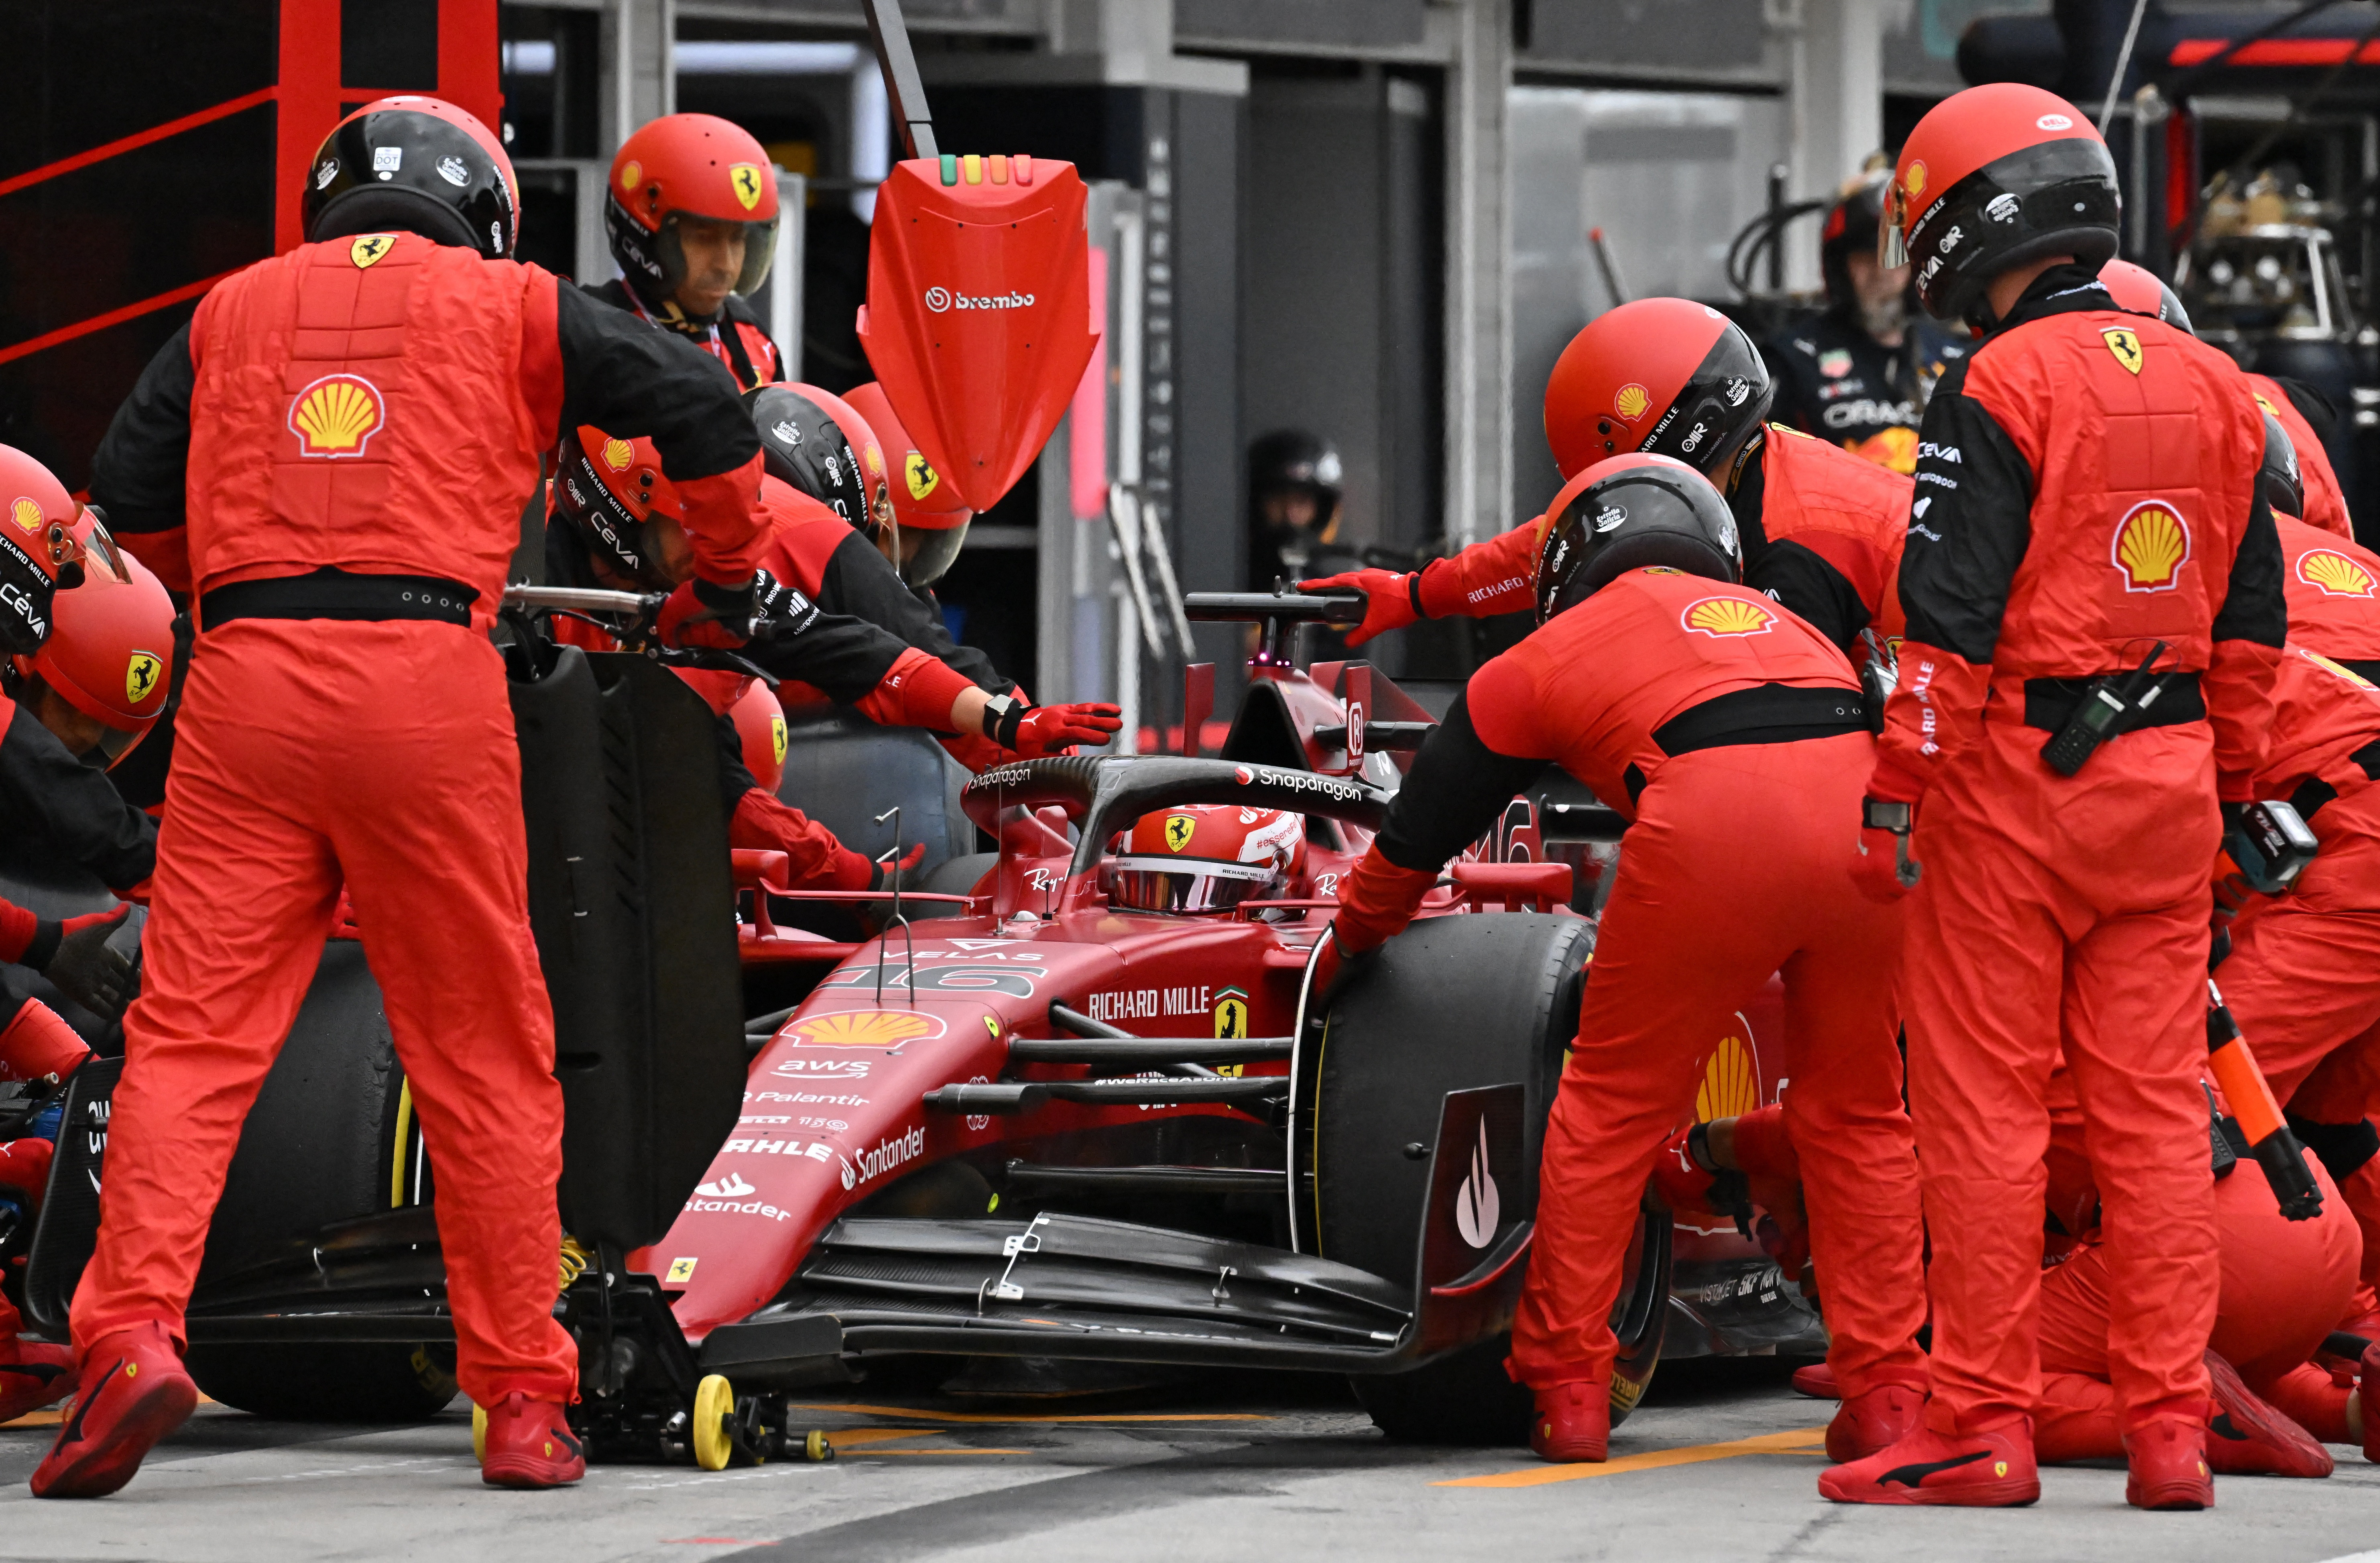 Motorsport: Charles Leclerc cruelly robbed at Hungarian Grand Prix by  Ferrari's tyre strategy blunder - NZ Herald